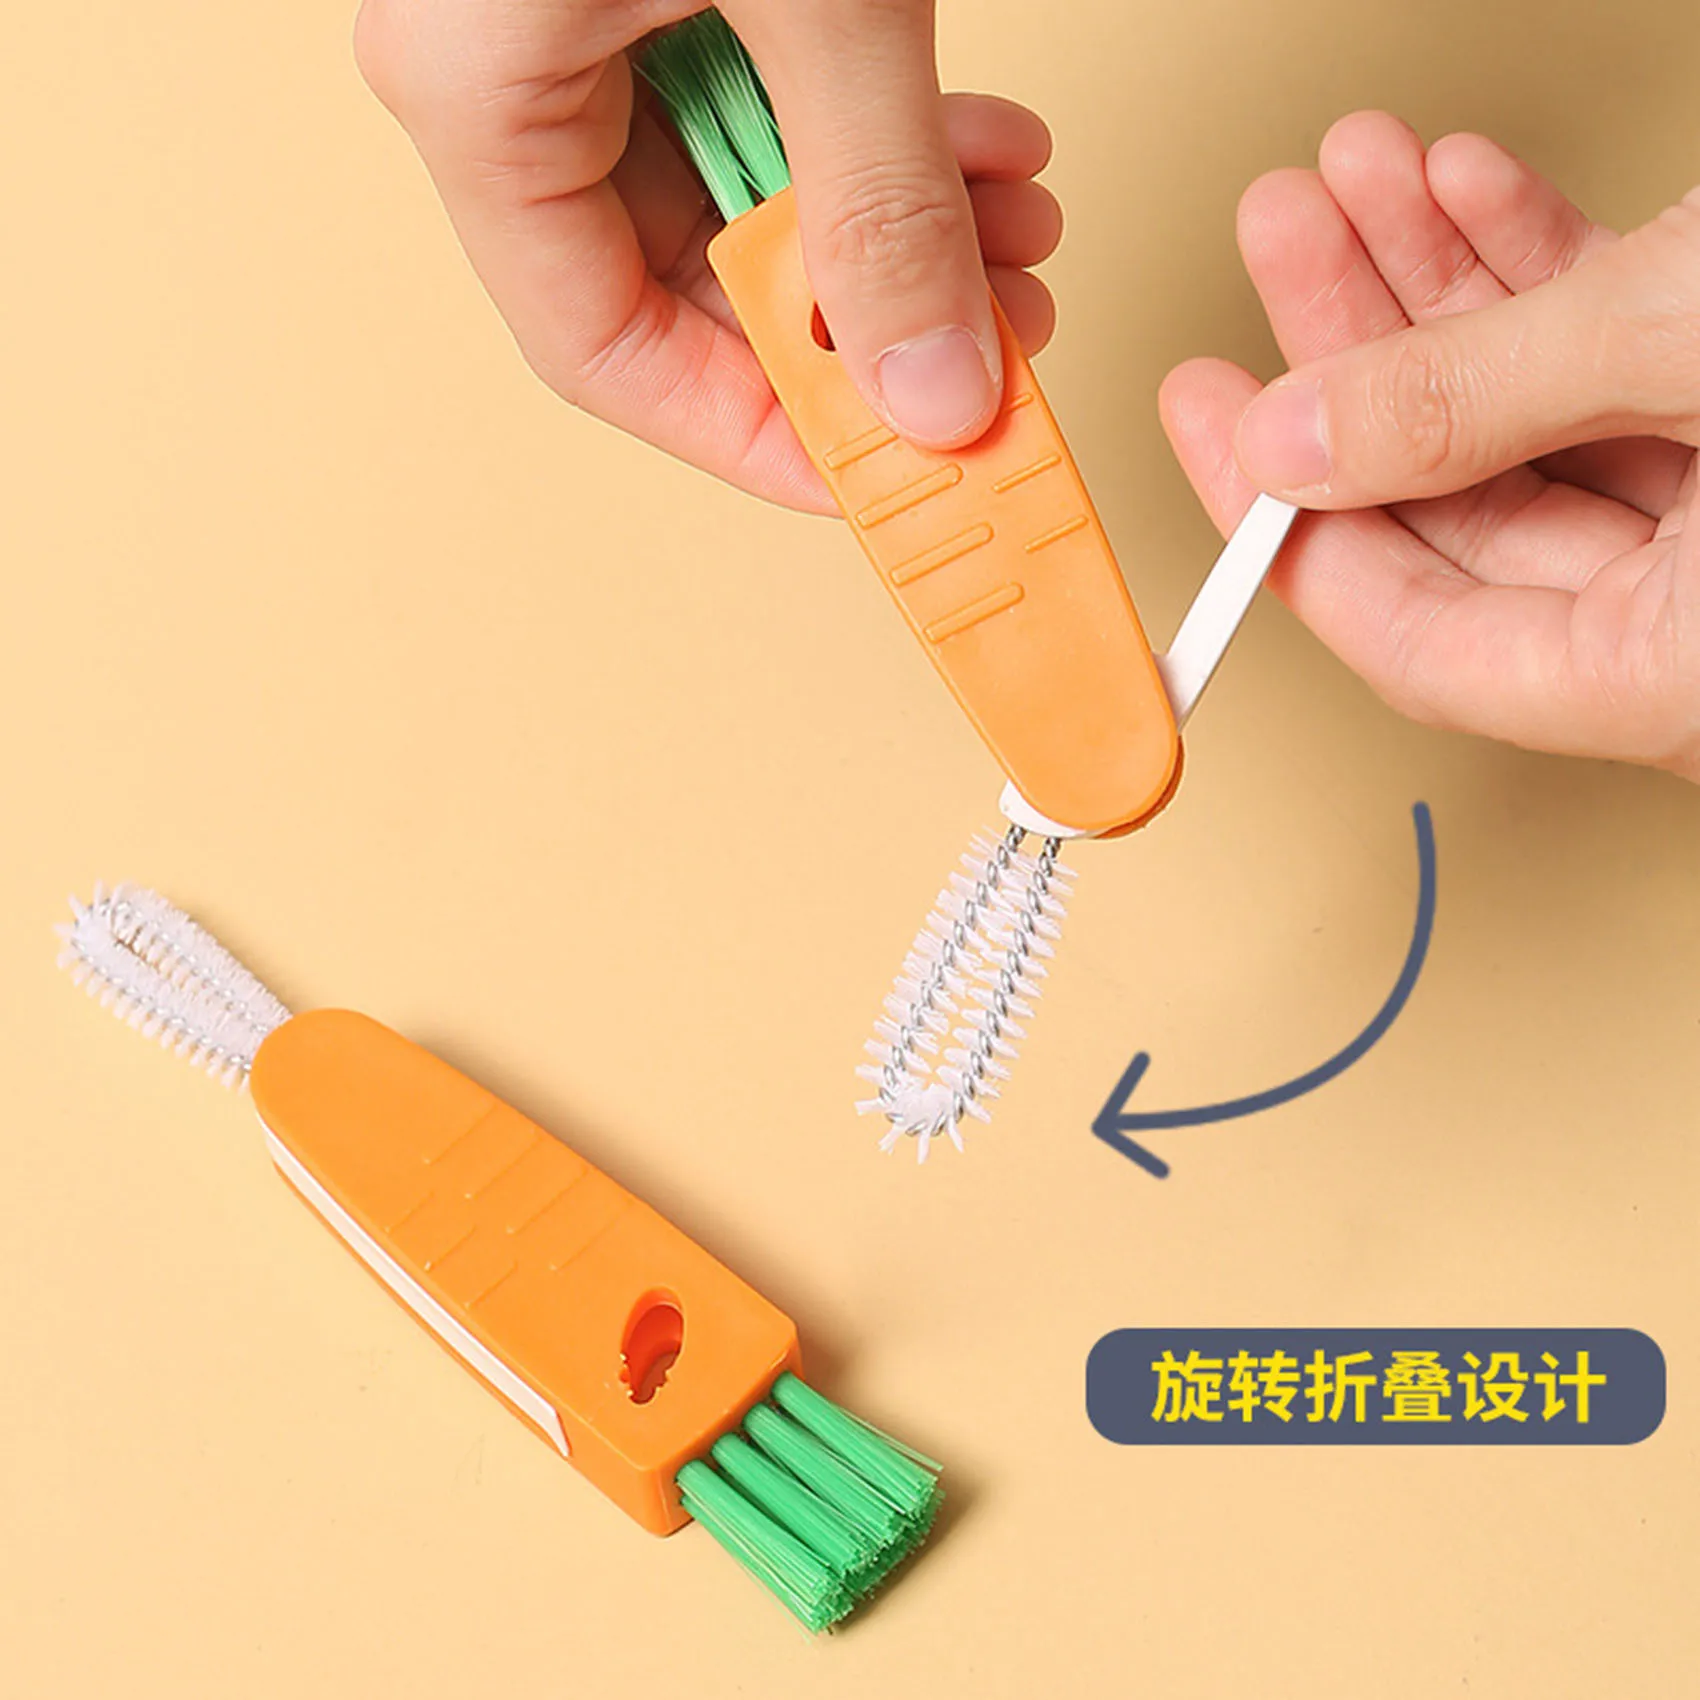 2023 Household cleaning cup rubber ring groove Milk bottle Vacuum cup cover gap cleaning brush plastic 3 in 1 Cup brushes